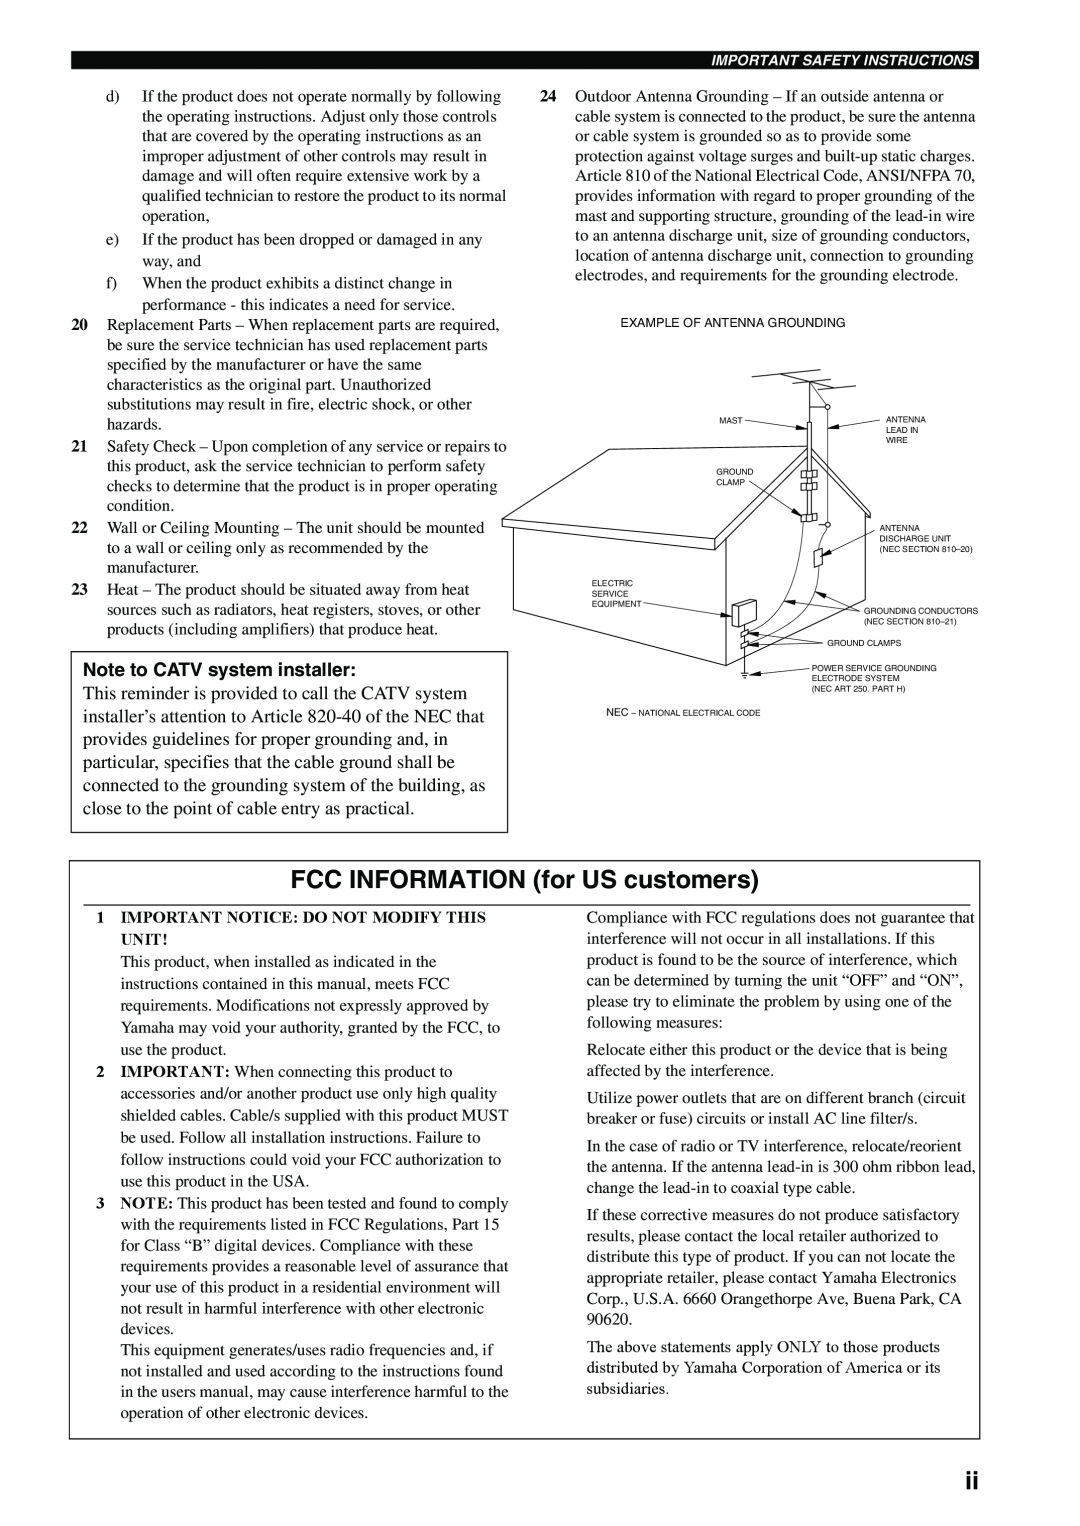 Yamaha X-V2600 owner manual FCC INFORMATION for US customers, Note to CATV system installer 